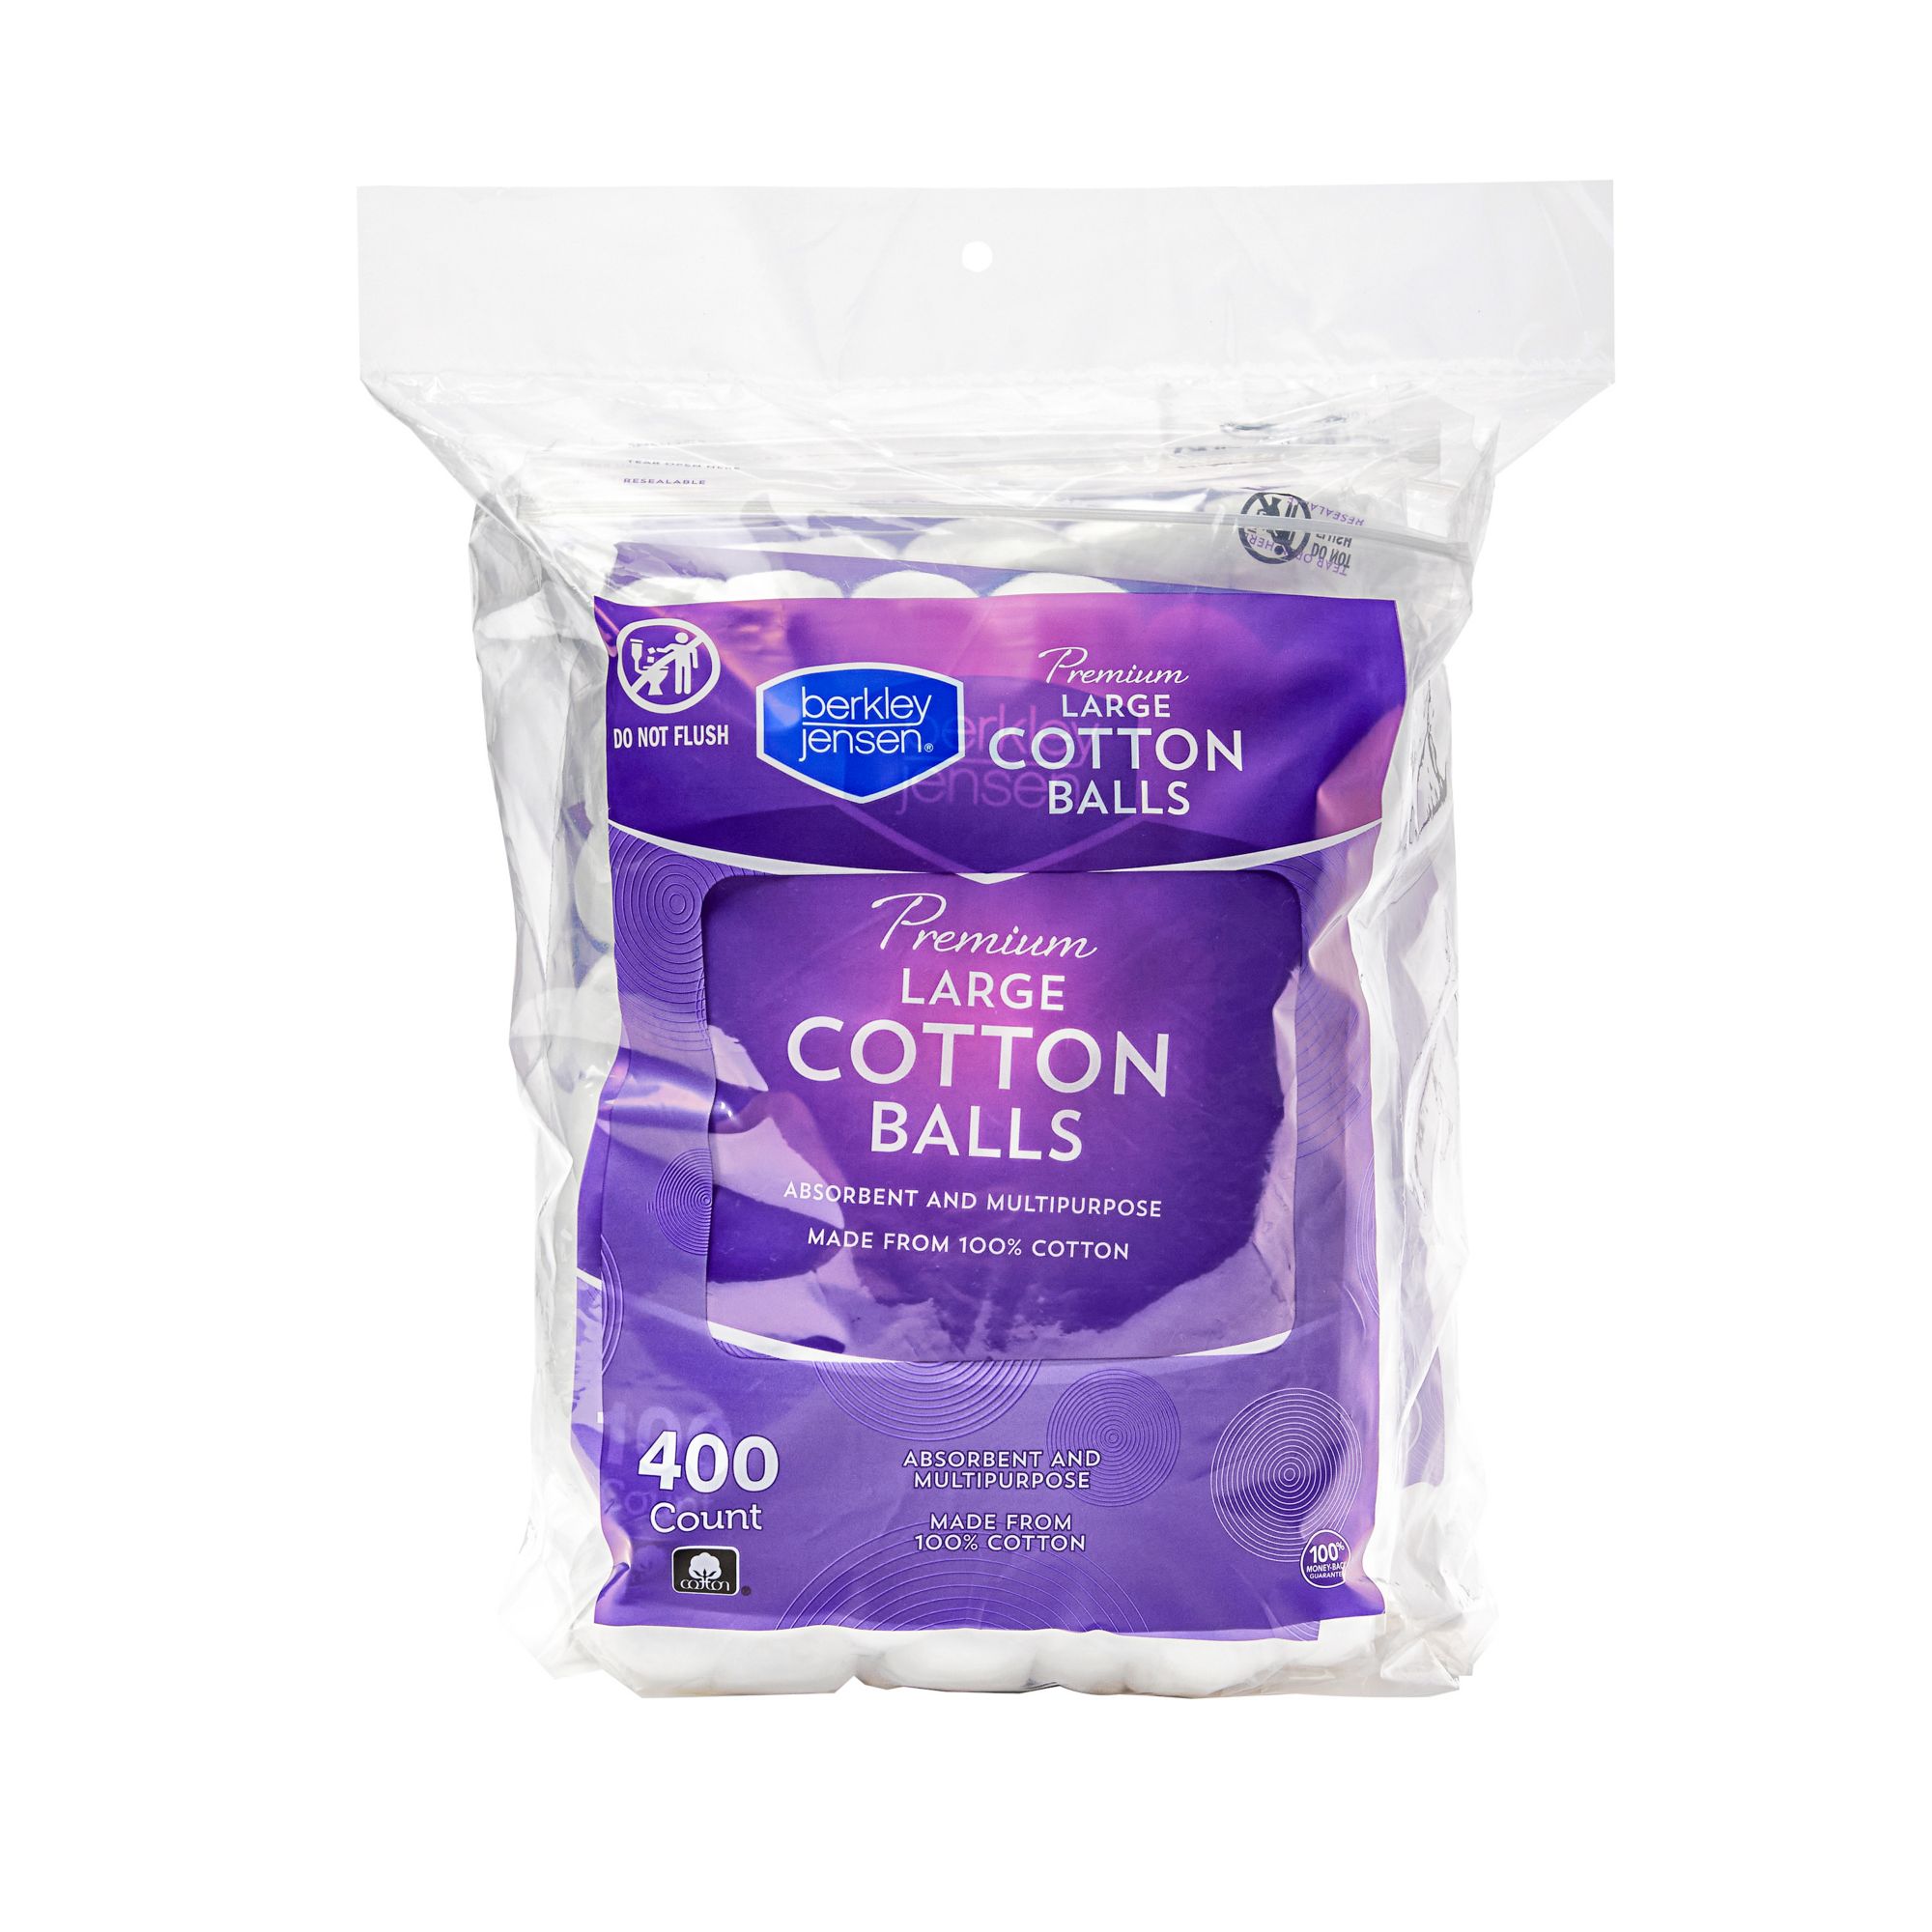  Cotton Balls for Facial Treatments, Nails and Make-Up Removal,  Applying Tonics & Cleansers, Multi-Purpose Soft Natural Cotton Balls (Large  100 Count) : Beauty & Personal Care